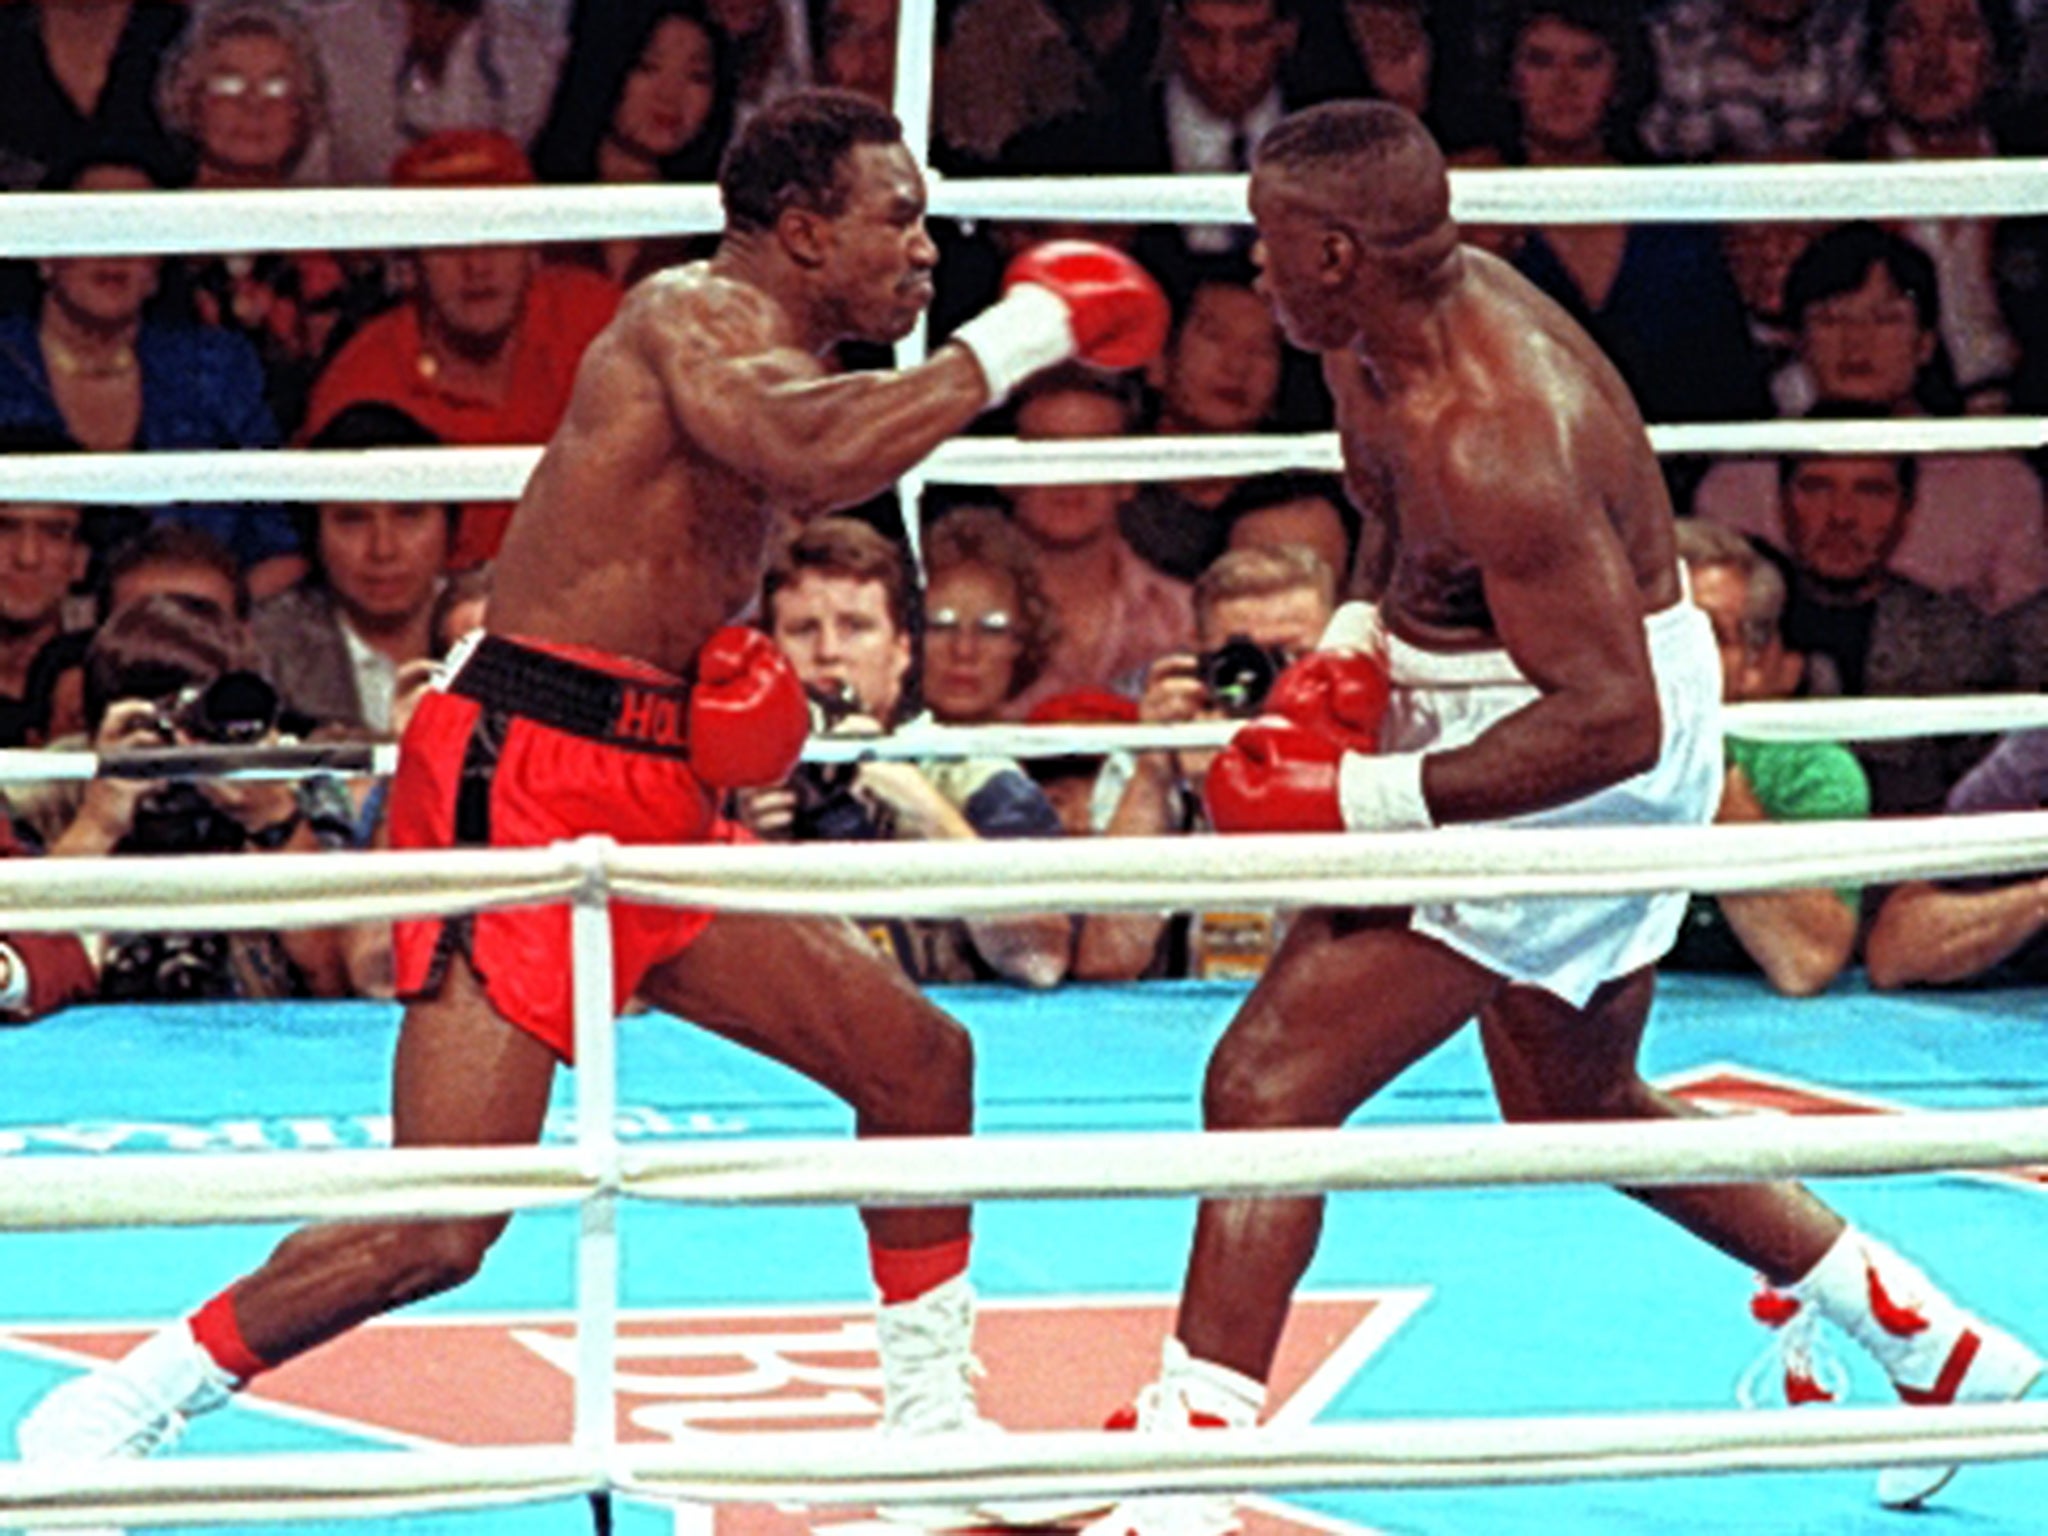 Buster Douglas (right) could have got up off the floor against Evander Holyfield, the referee said